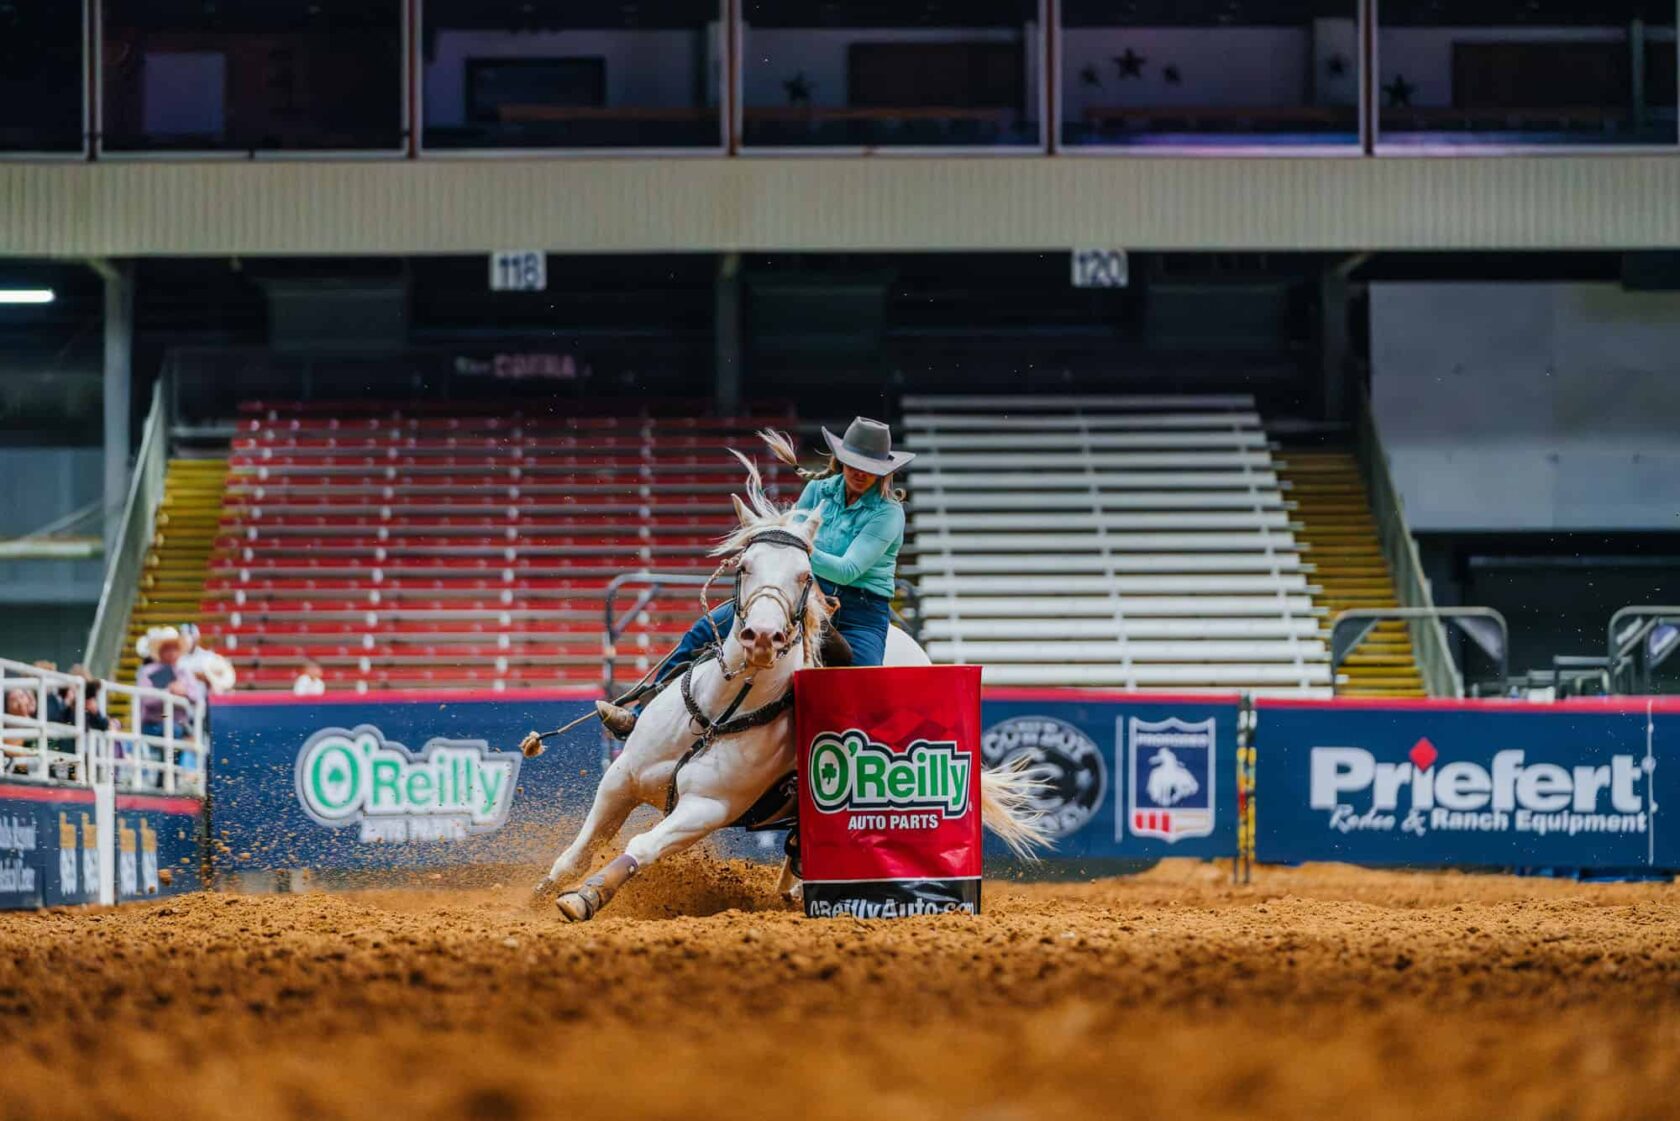 A rodeo competitor in a teal shirt and cowboy hat skillfully guides a galloping white horse around a red barrel in a dirt arena, showcasing a barrel racing event at a rodeo competition.